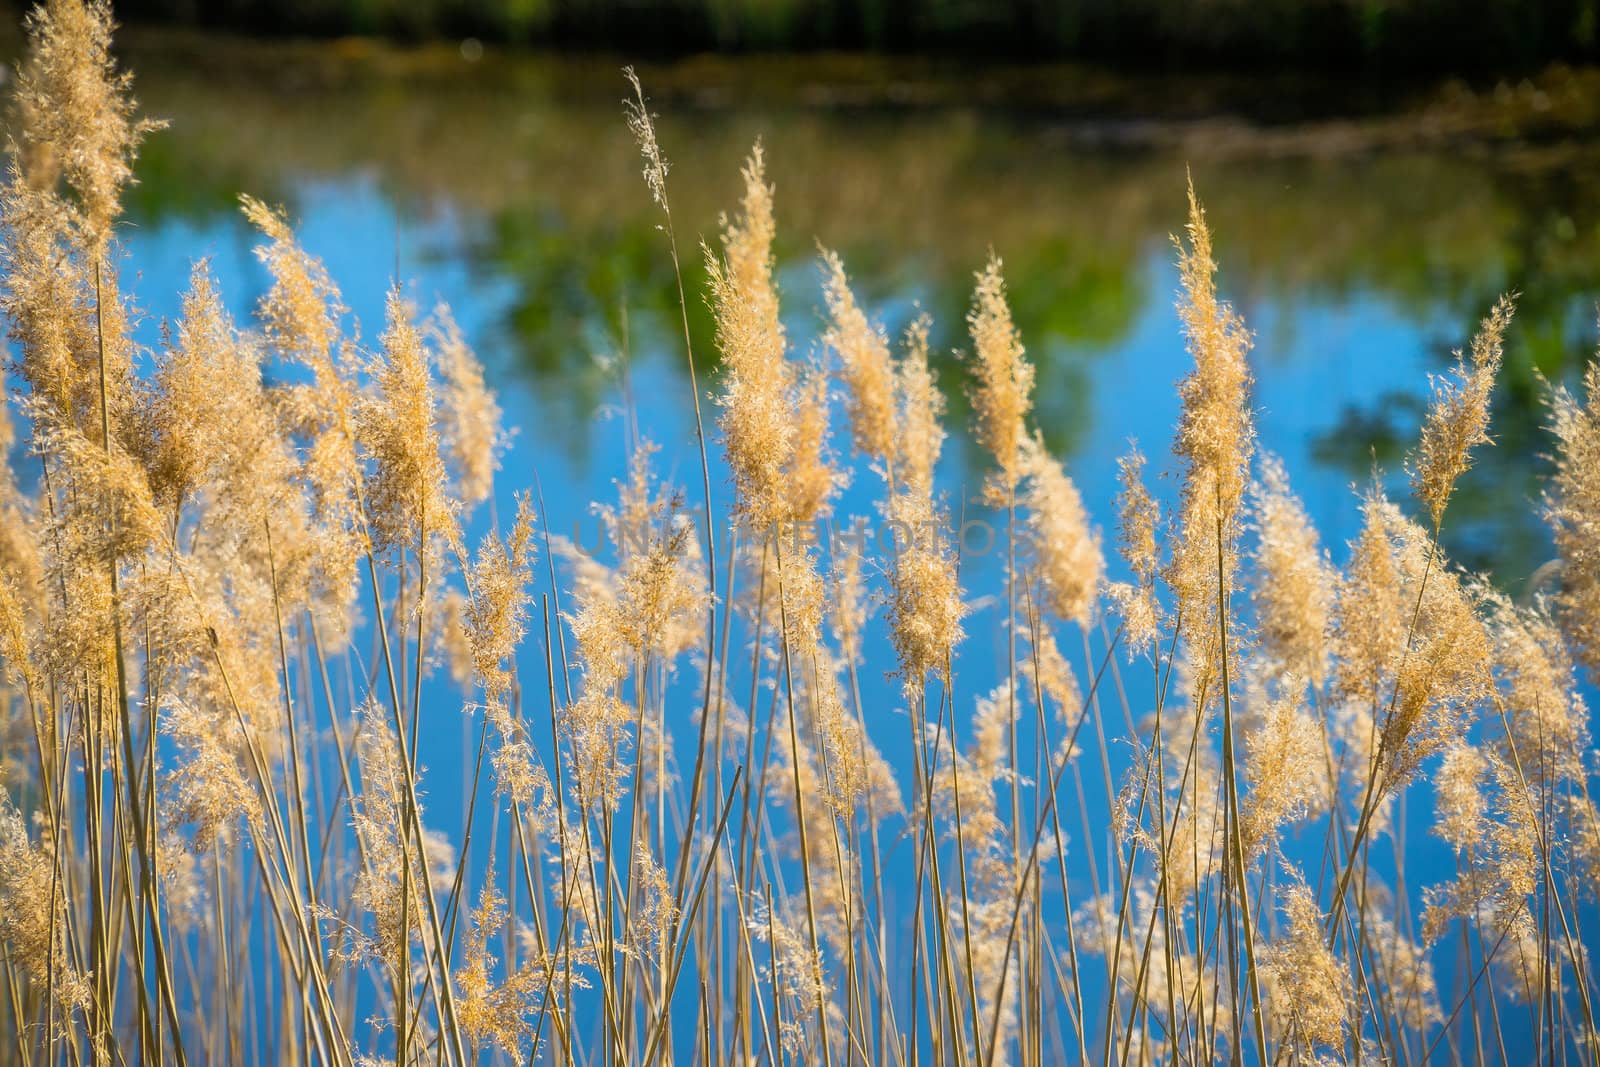 Blooming reed in front of the deliberately blurred pond with the reflection of trees in the water by geogif